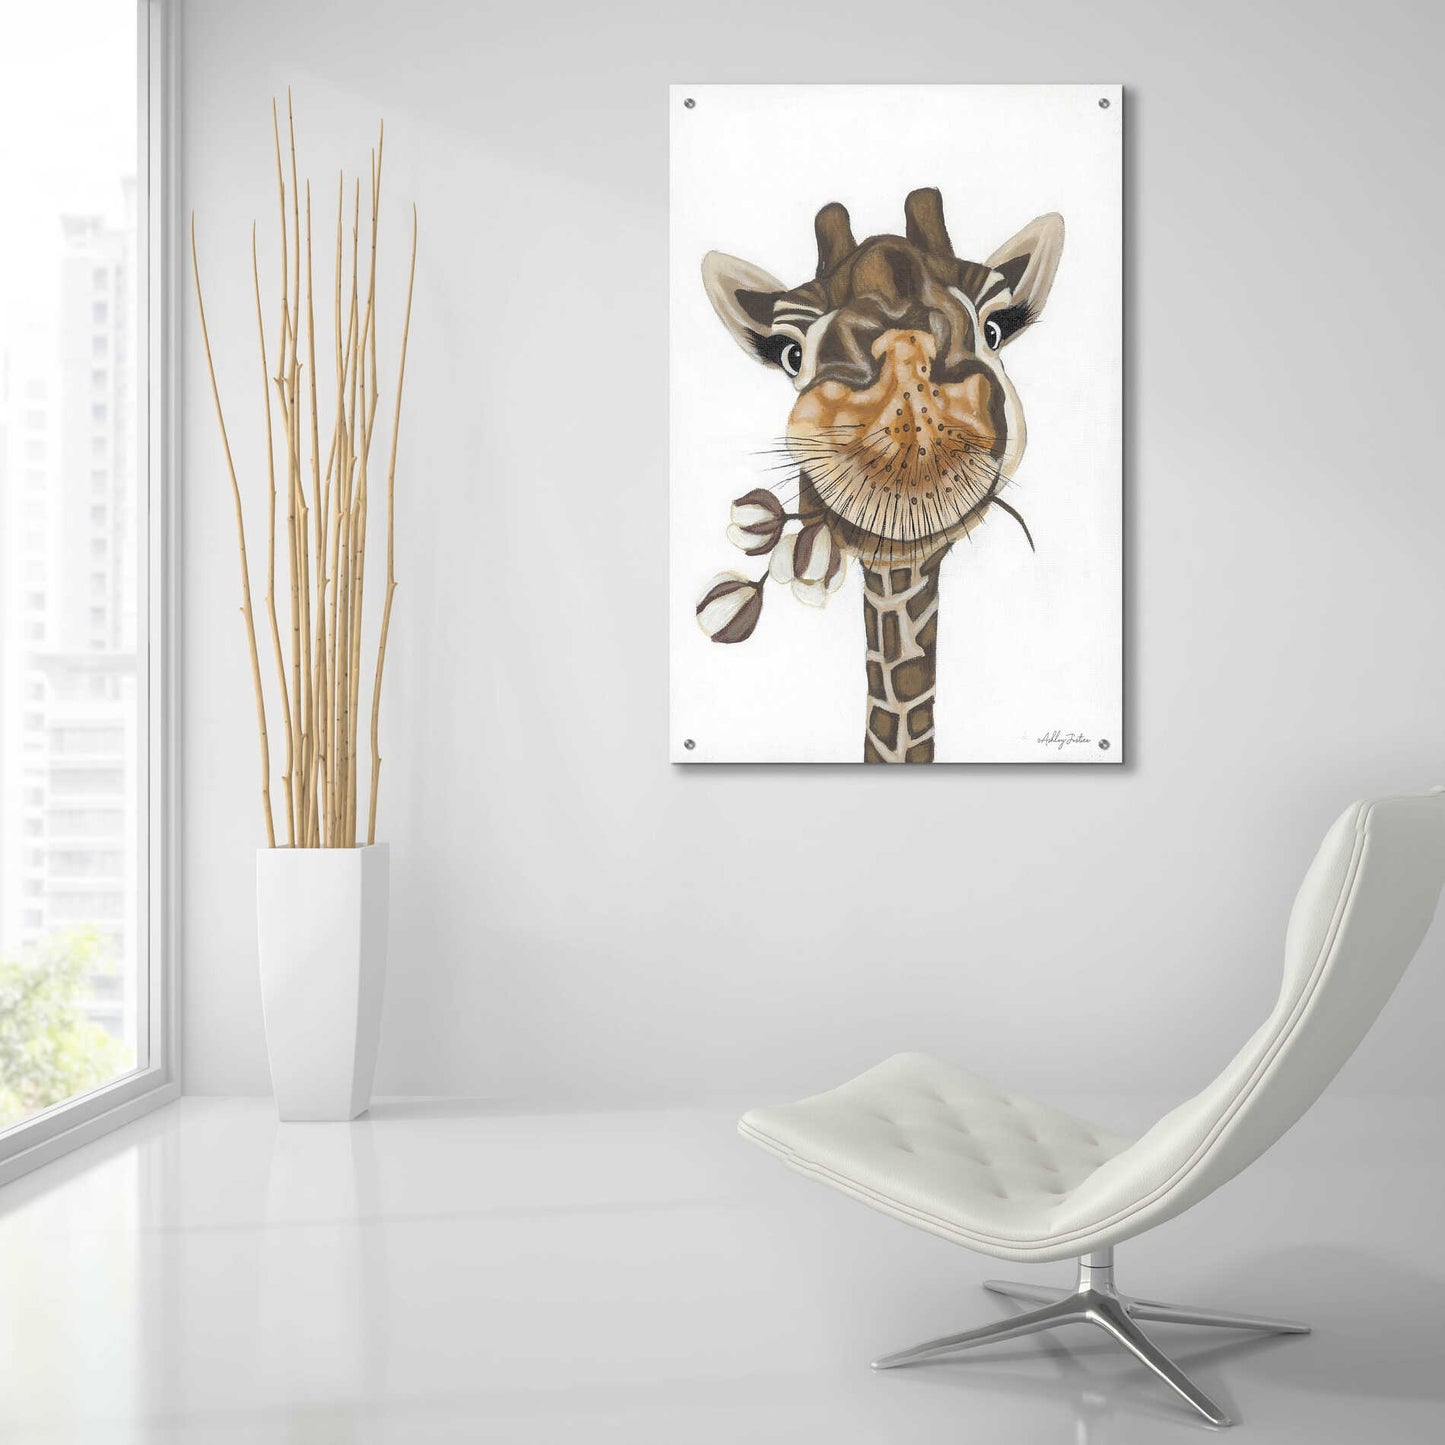 Epic Art 'Giraffe with Cotton' by Ashley Justice, Acrylic Glass Wall Art,24x36